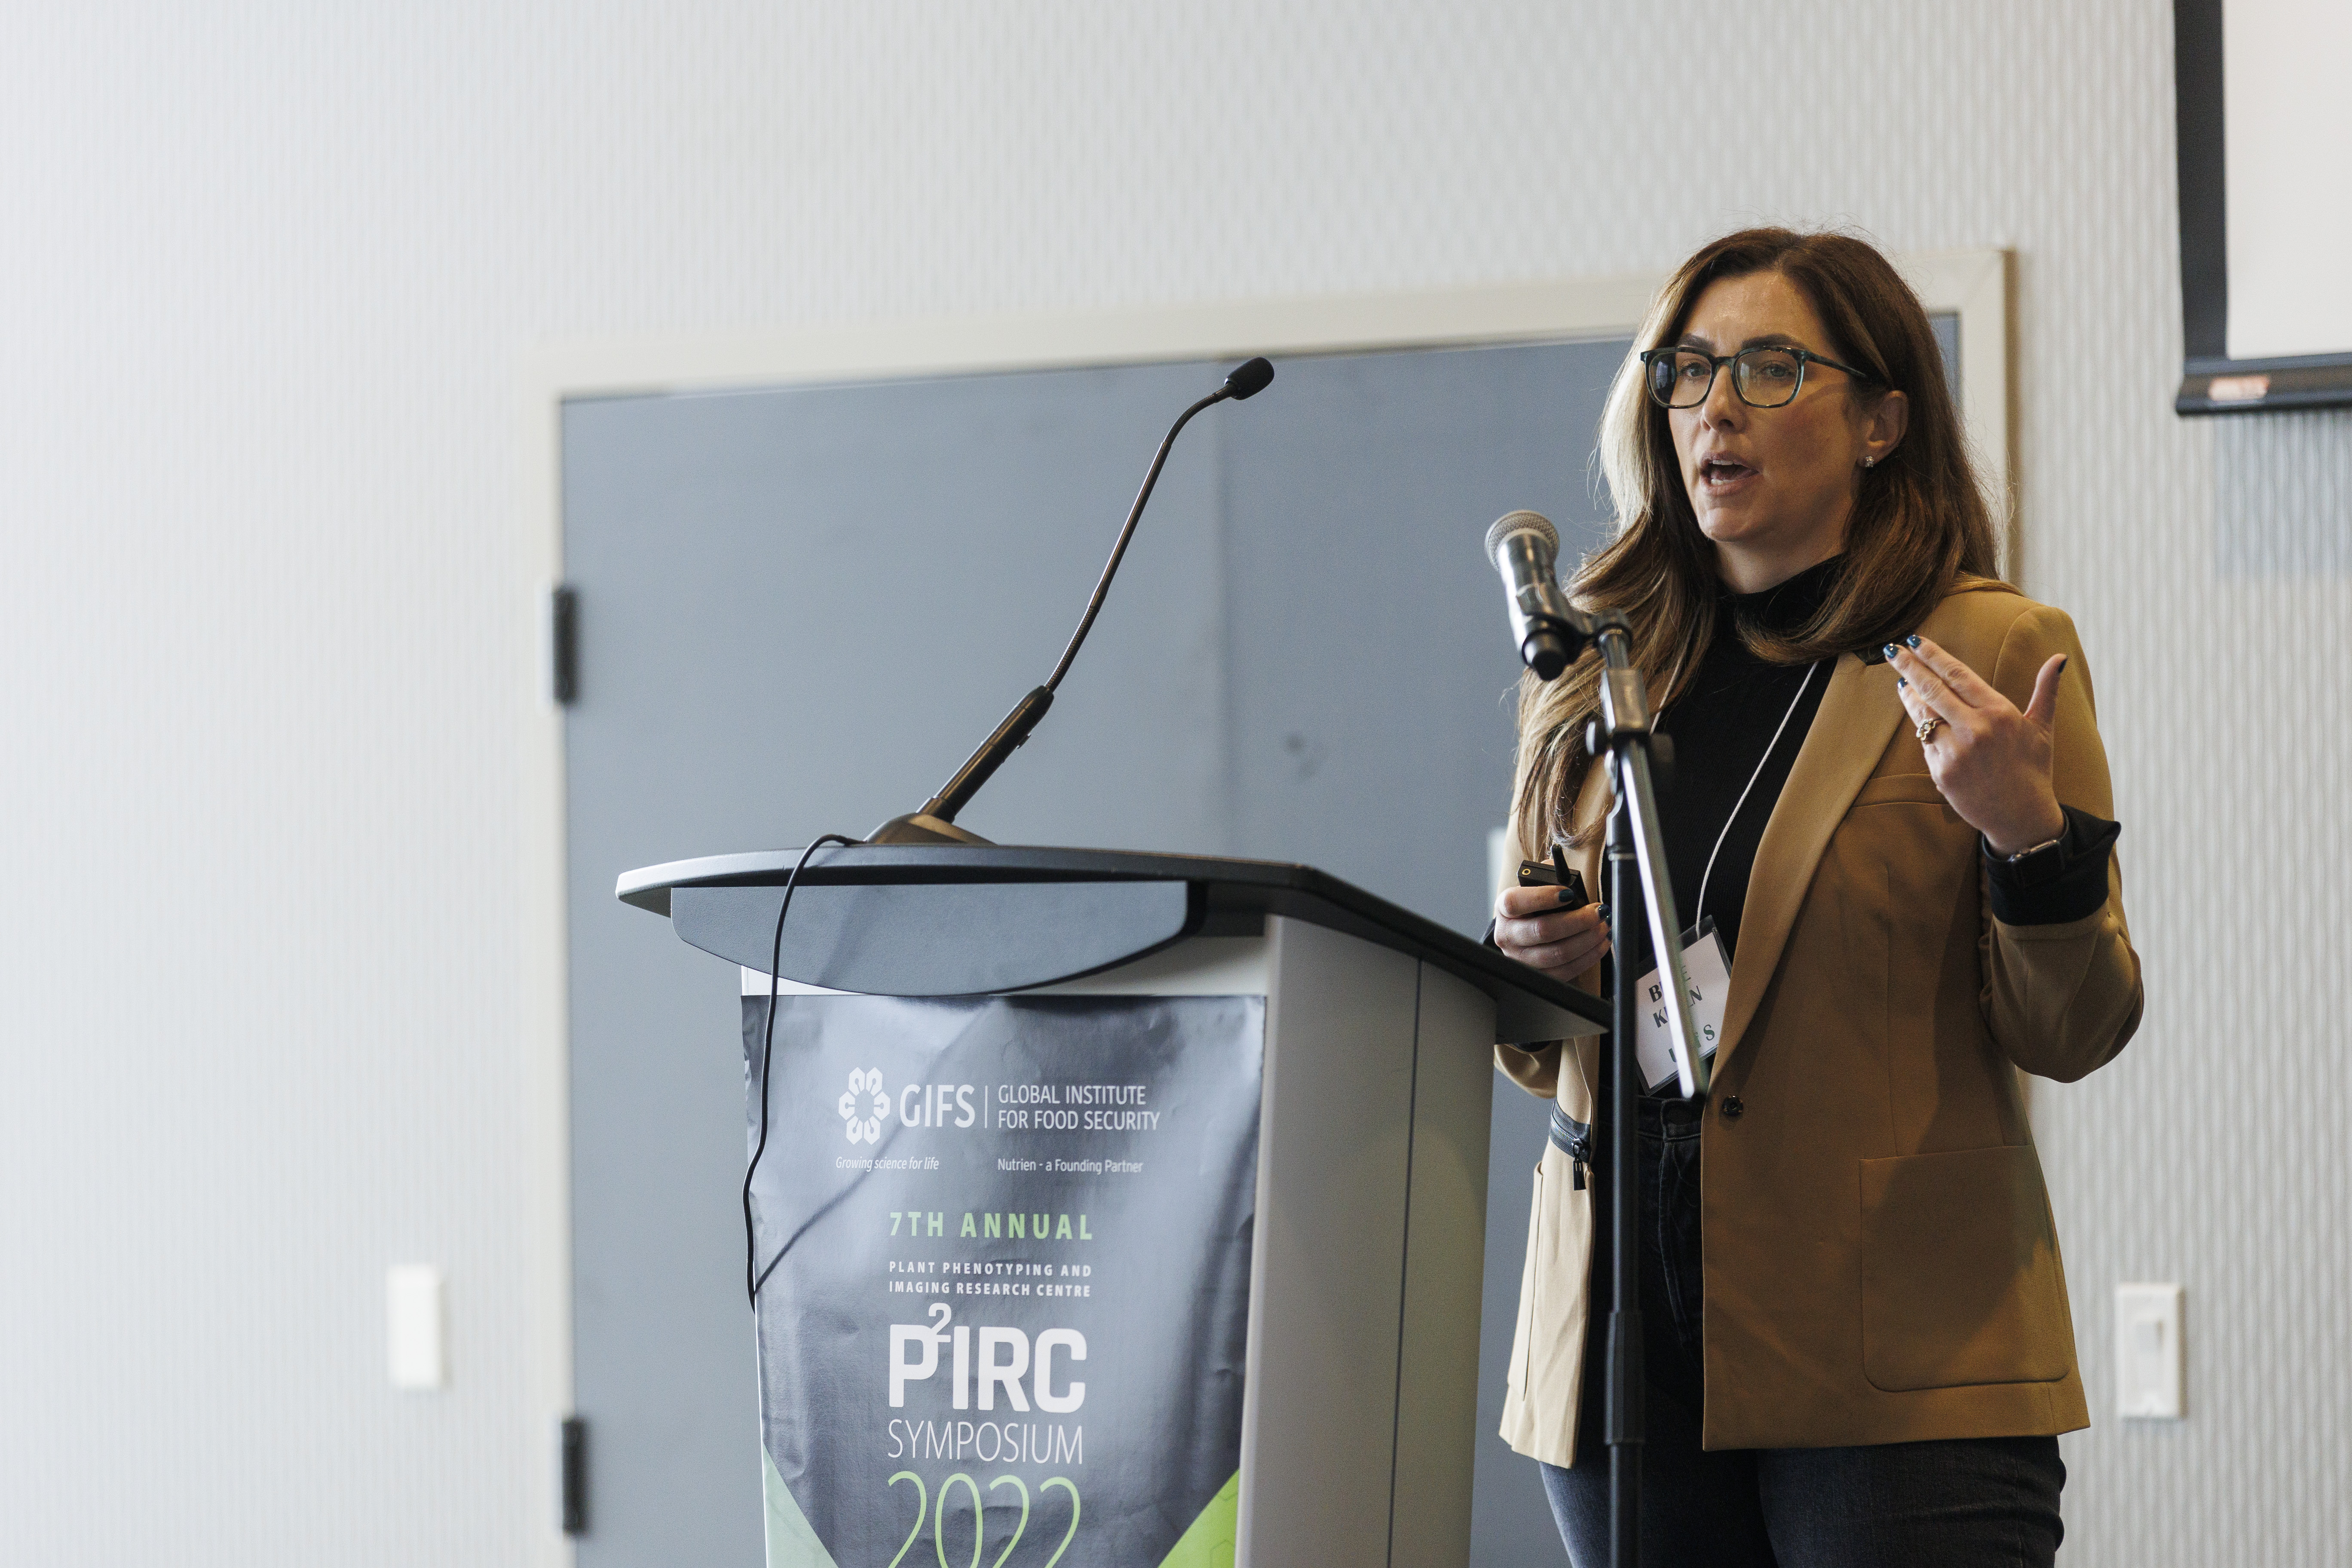 A wide range of research topics were addressed at the P2IRC Symposium. Here, Dr. Breeanna Kelln of the University of Saskatchewan presents on forage management and utilization.  